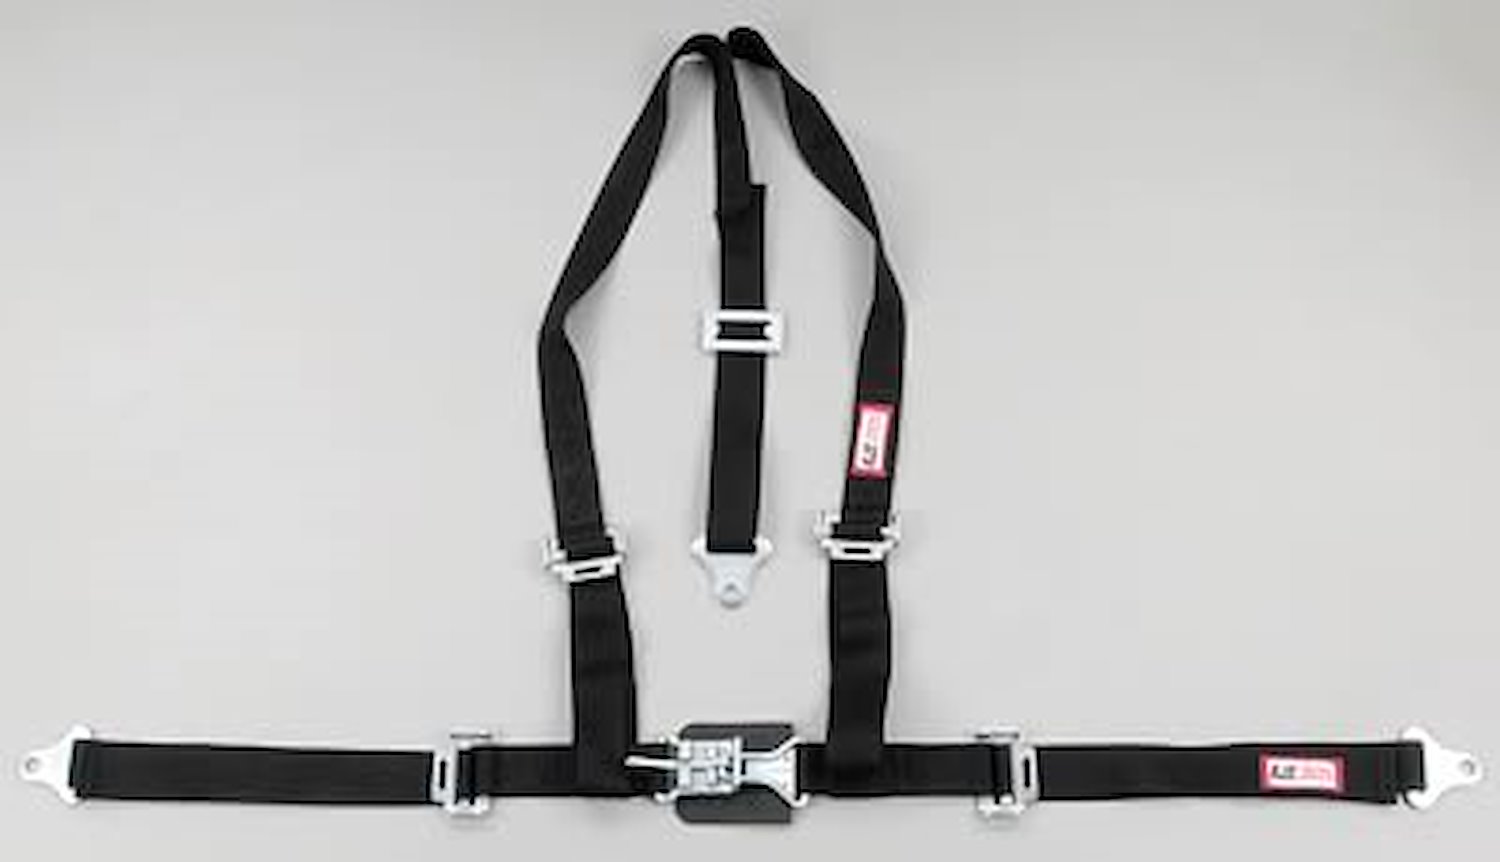 NON-SFI L&L HARNESS 3 PULL UP Lap Belt SEWN IN 2 S.H. Individual ROLL BAR Mount ALL WRAP ENDS RED